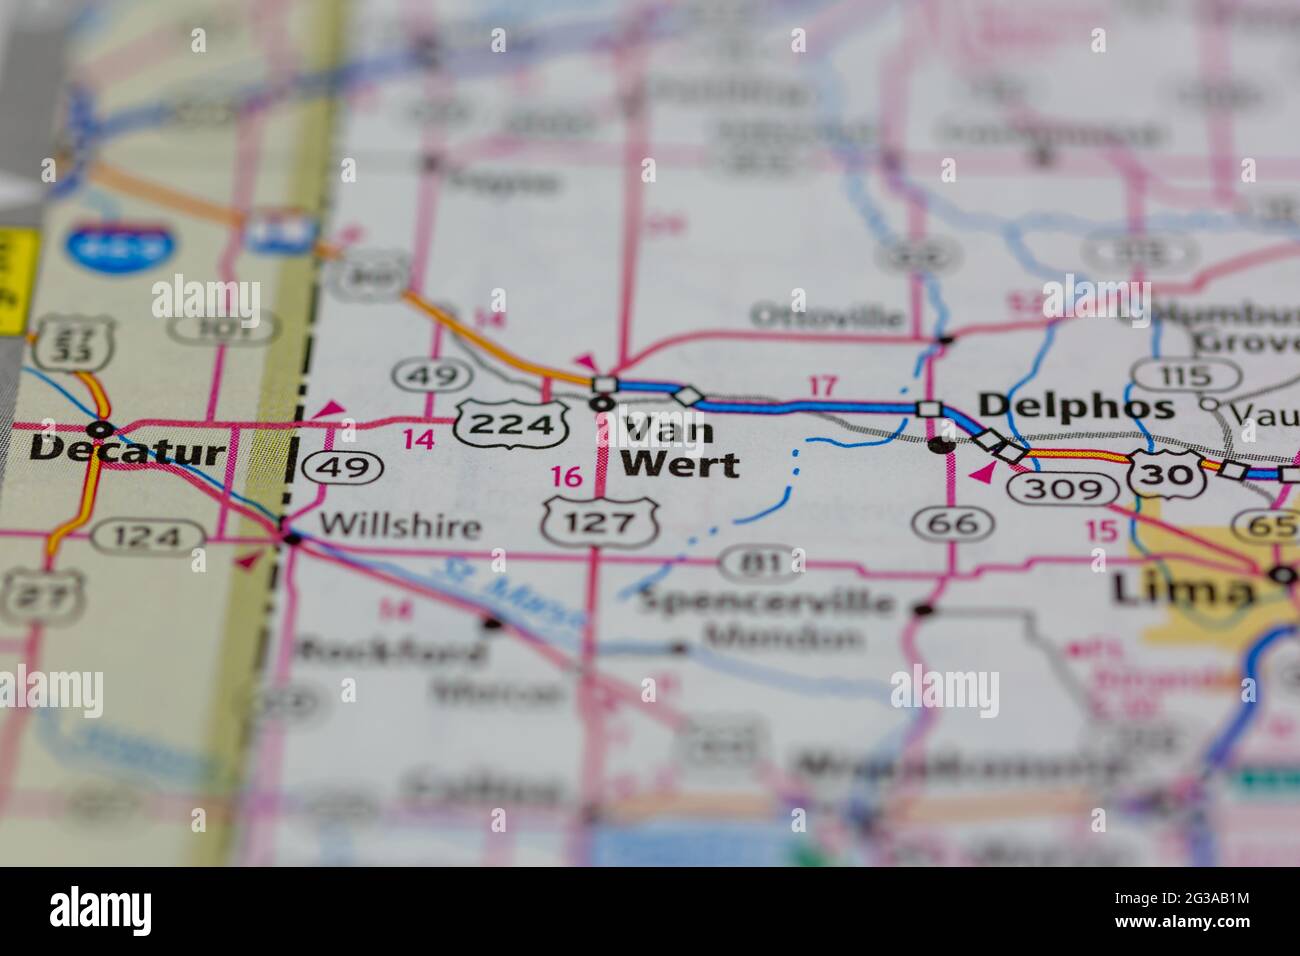 Van Wert Ohio USA shown on a Geography map or Road map Stock Photo